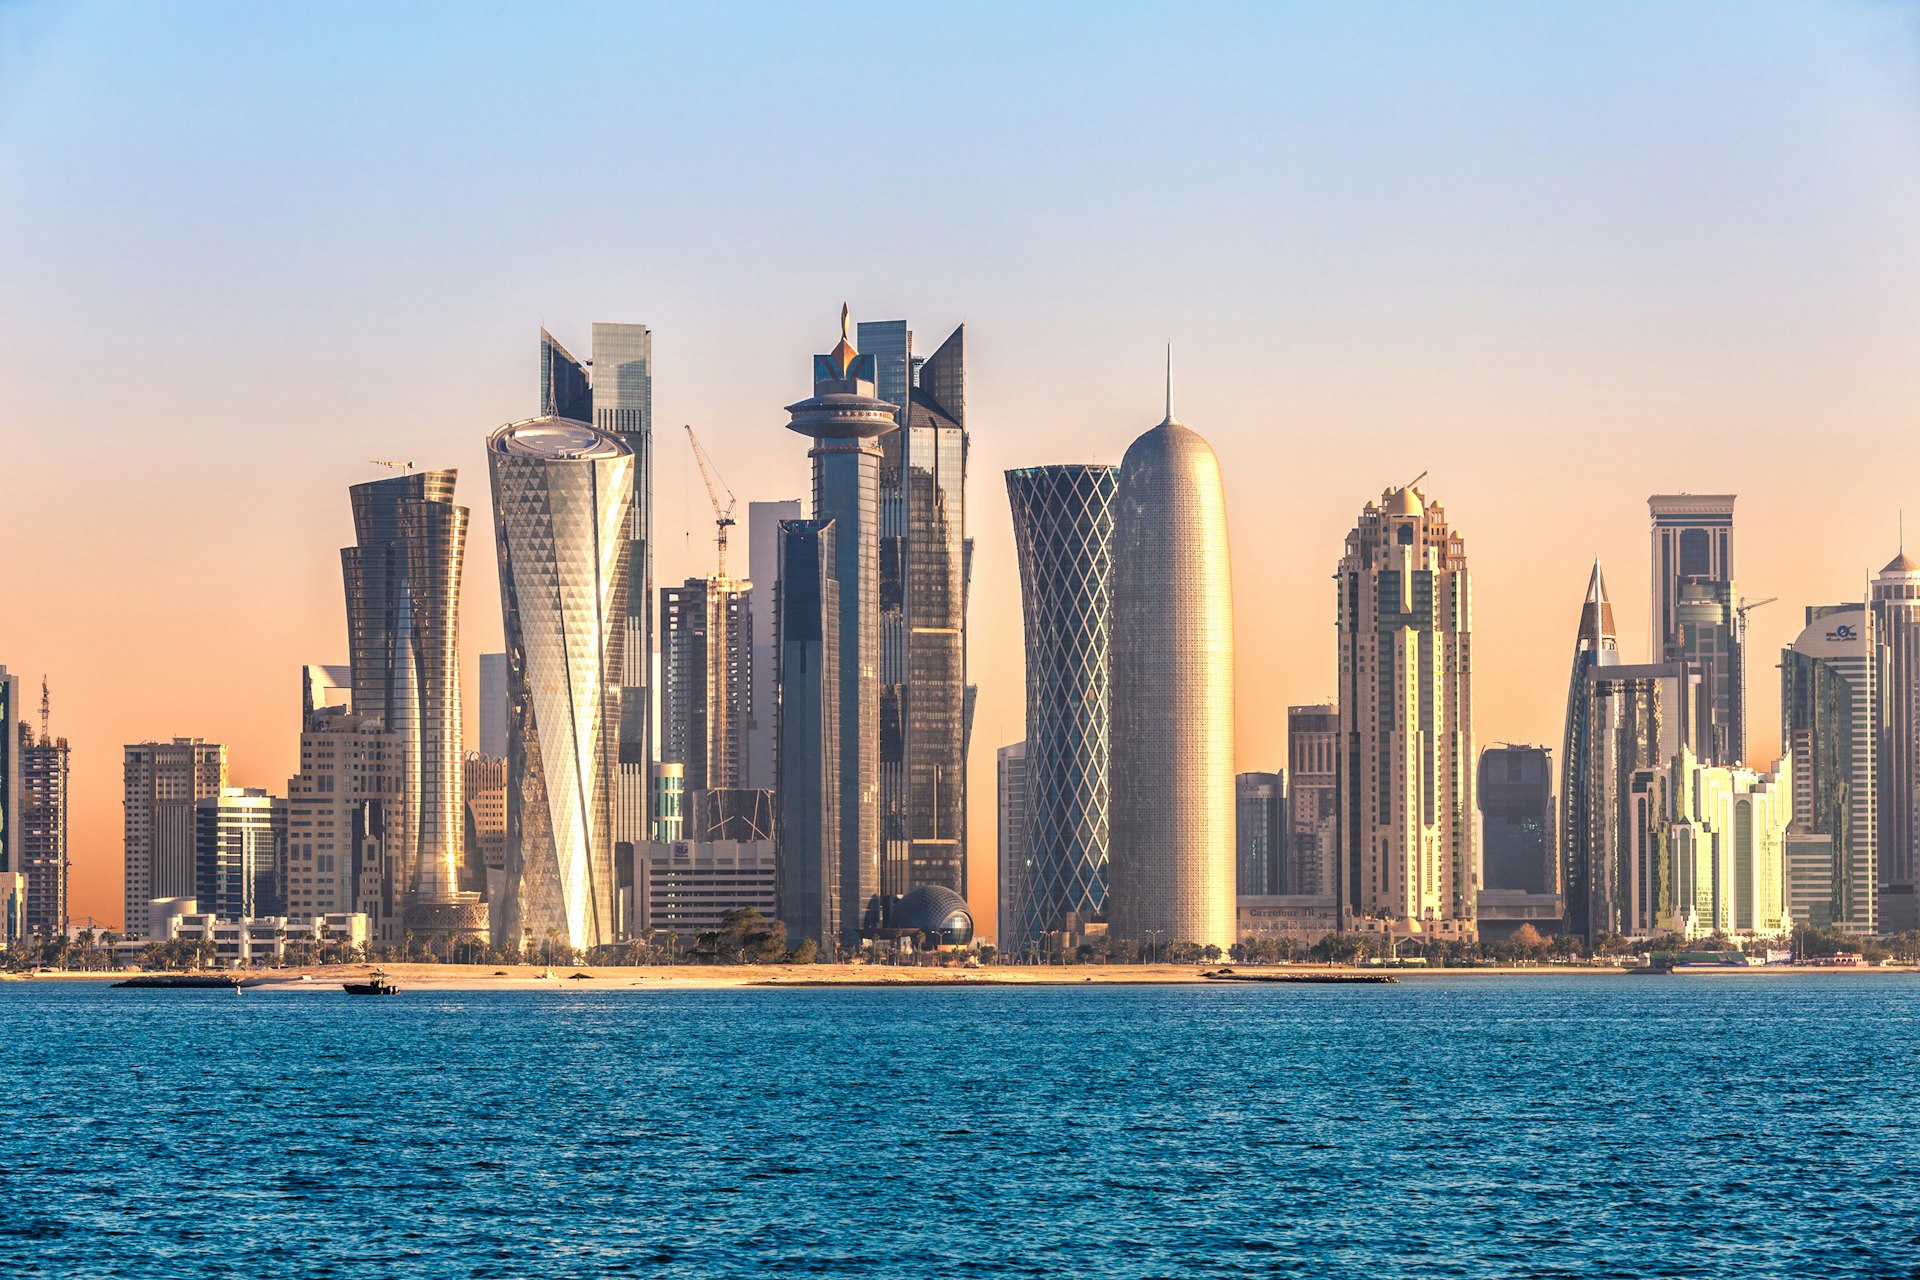 The skyline of Doha, Qatar, as seen from the water at sunset; numerous skyscrapers have unique, twisting shapes.